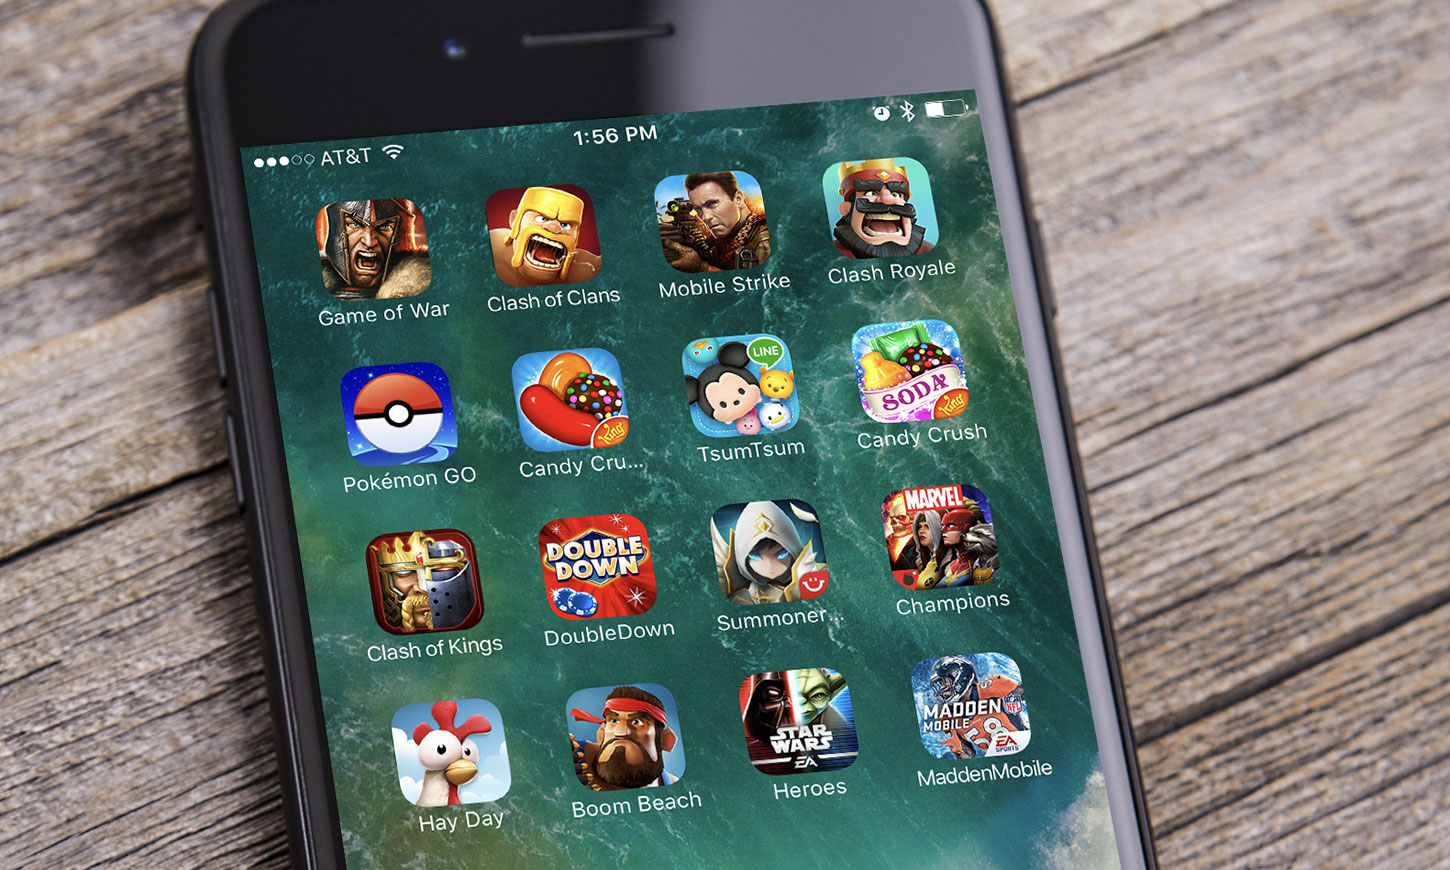  A screenshot of a mobile phone showing a variety of popular mobile games.